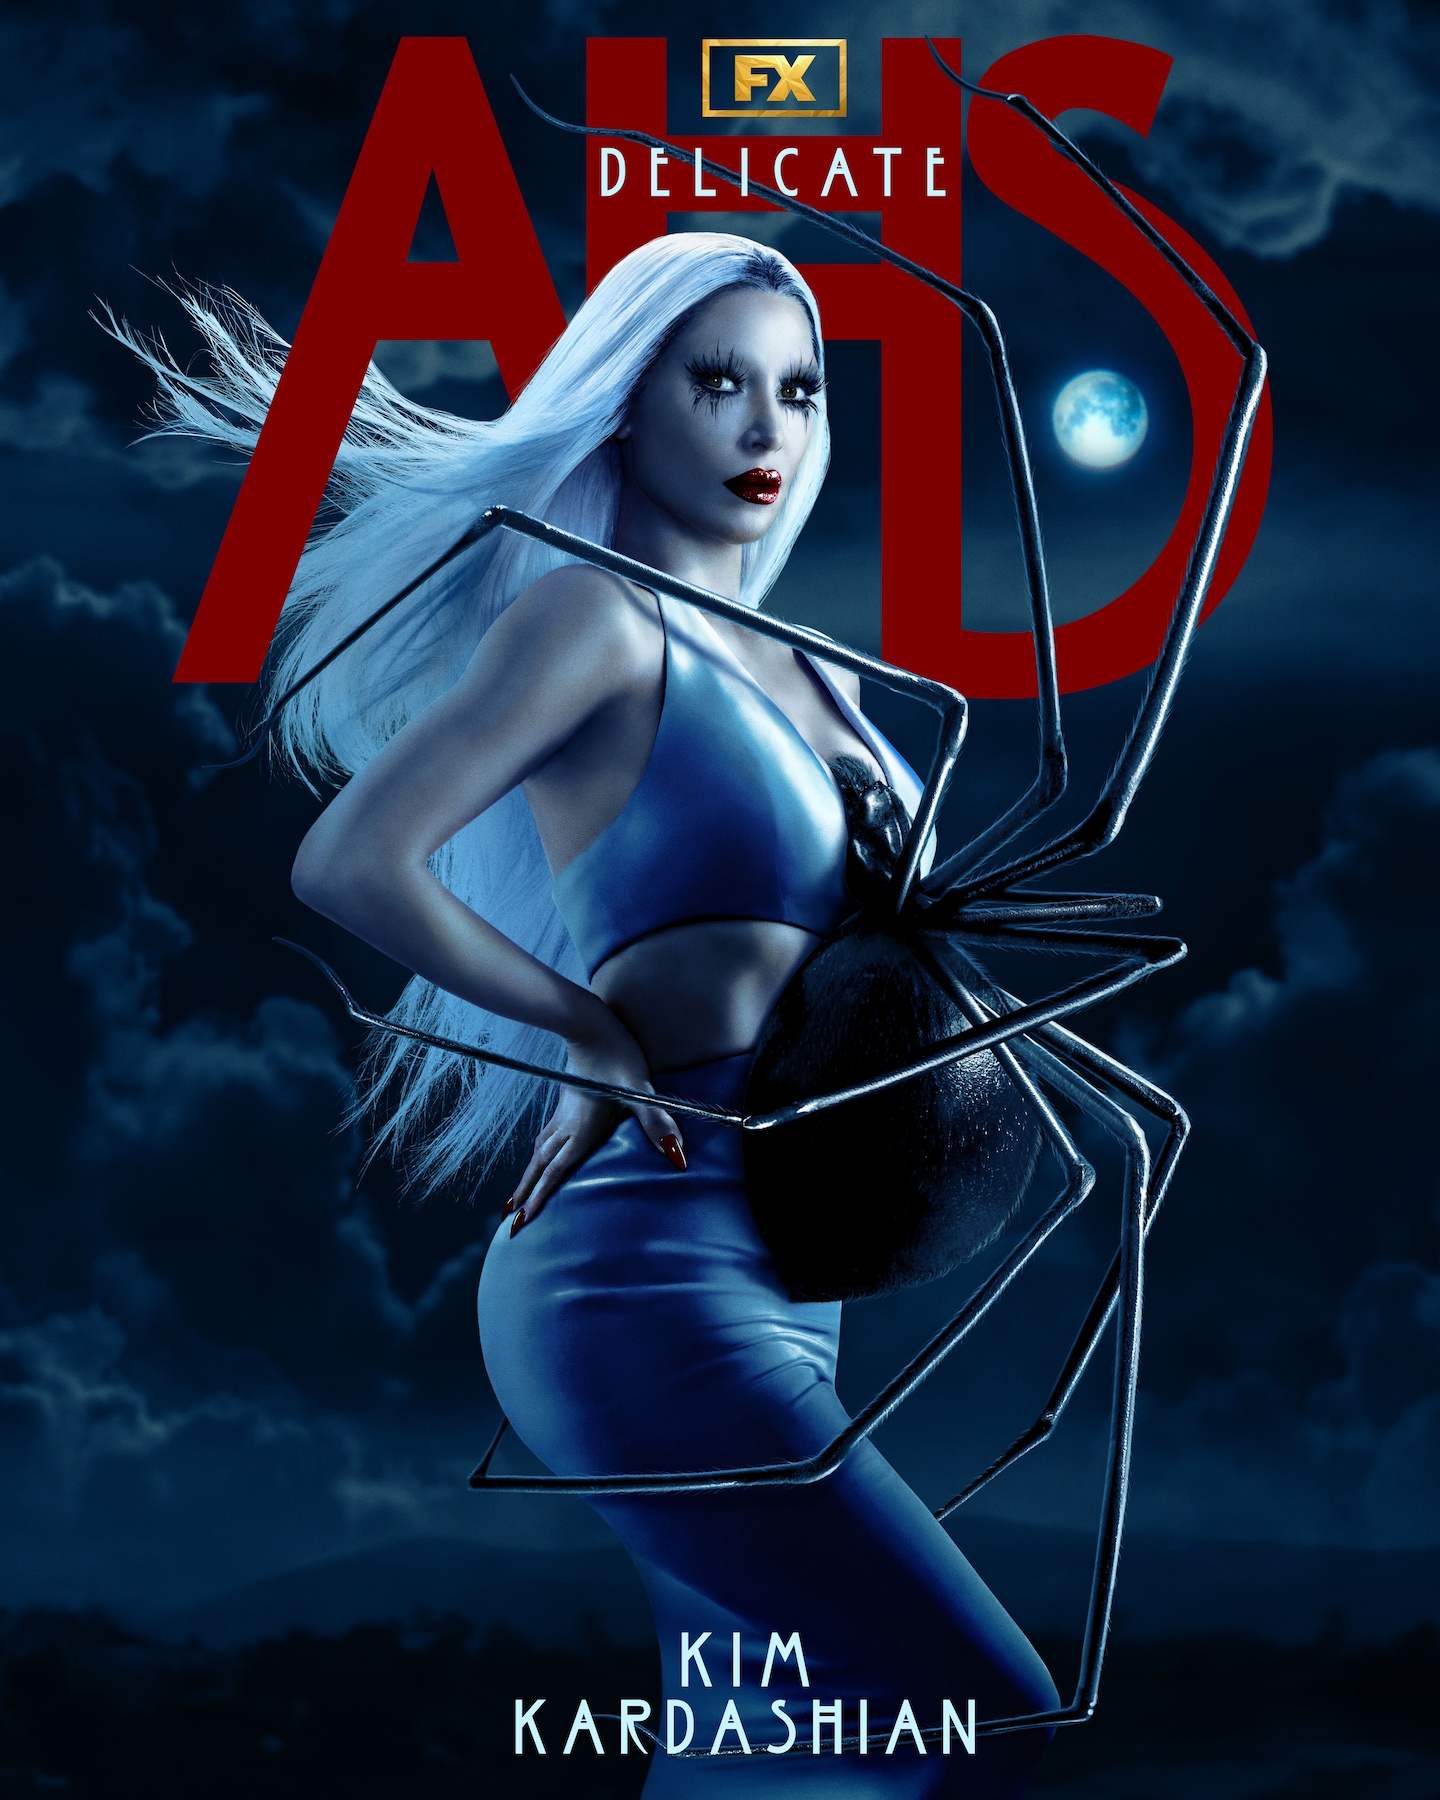 AHS Delicate cover art of Kim Kardashian with a spider belly